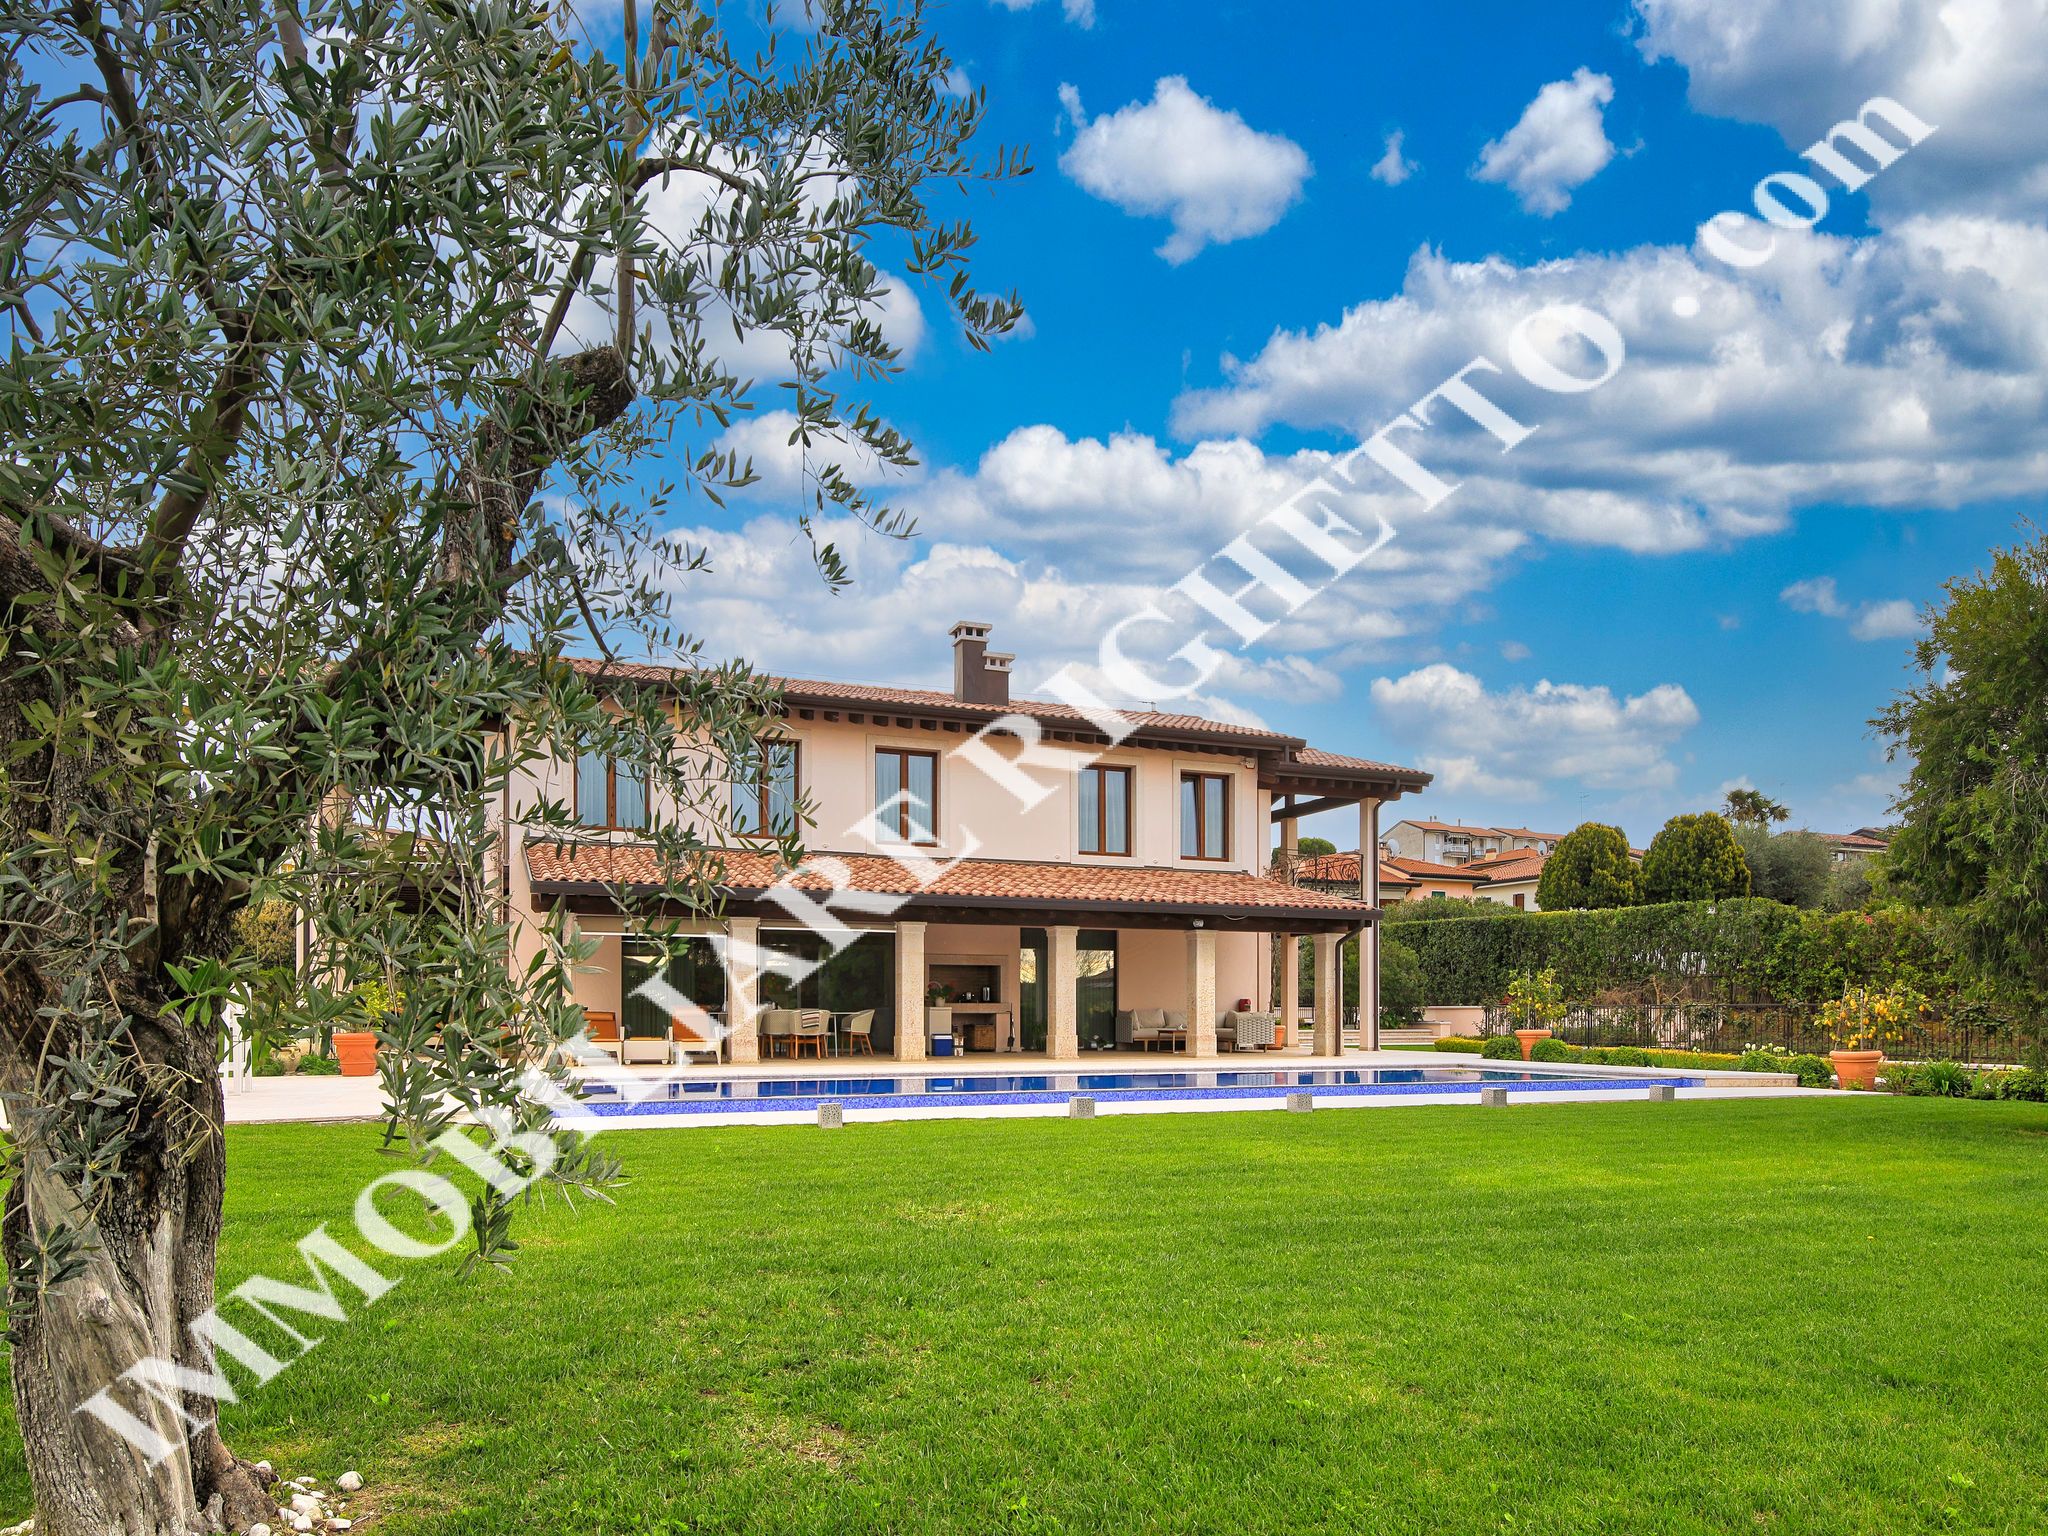 offer real estate for sale Luxury villa a stone's throw from the lake.